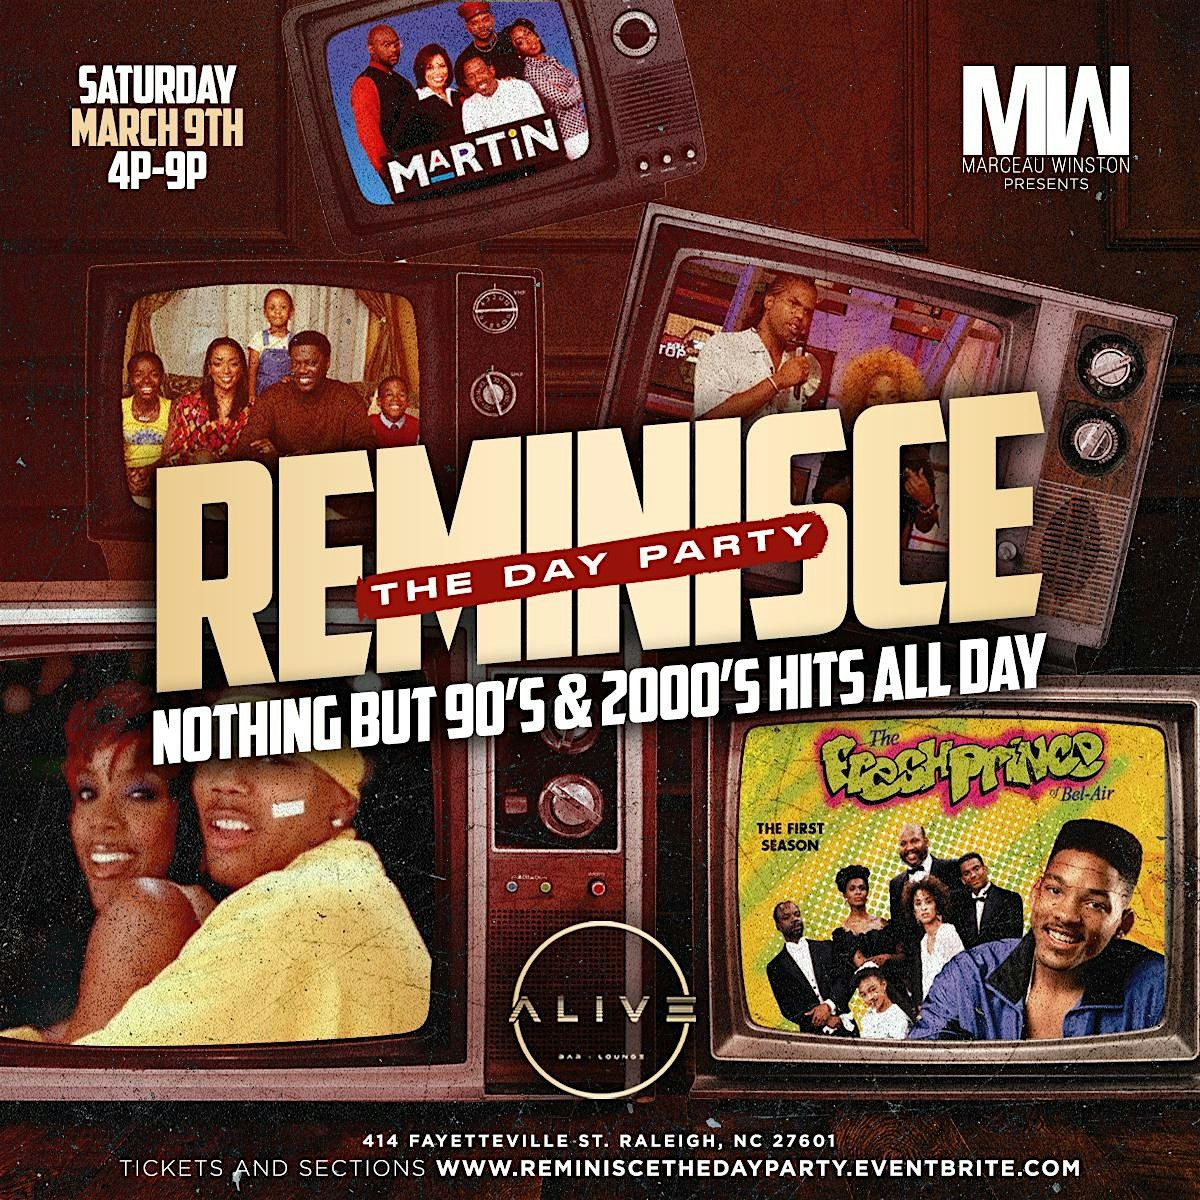 Reminisce The Day Party "Nothing but 90s & 2000s Hits All Day"